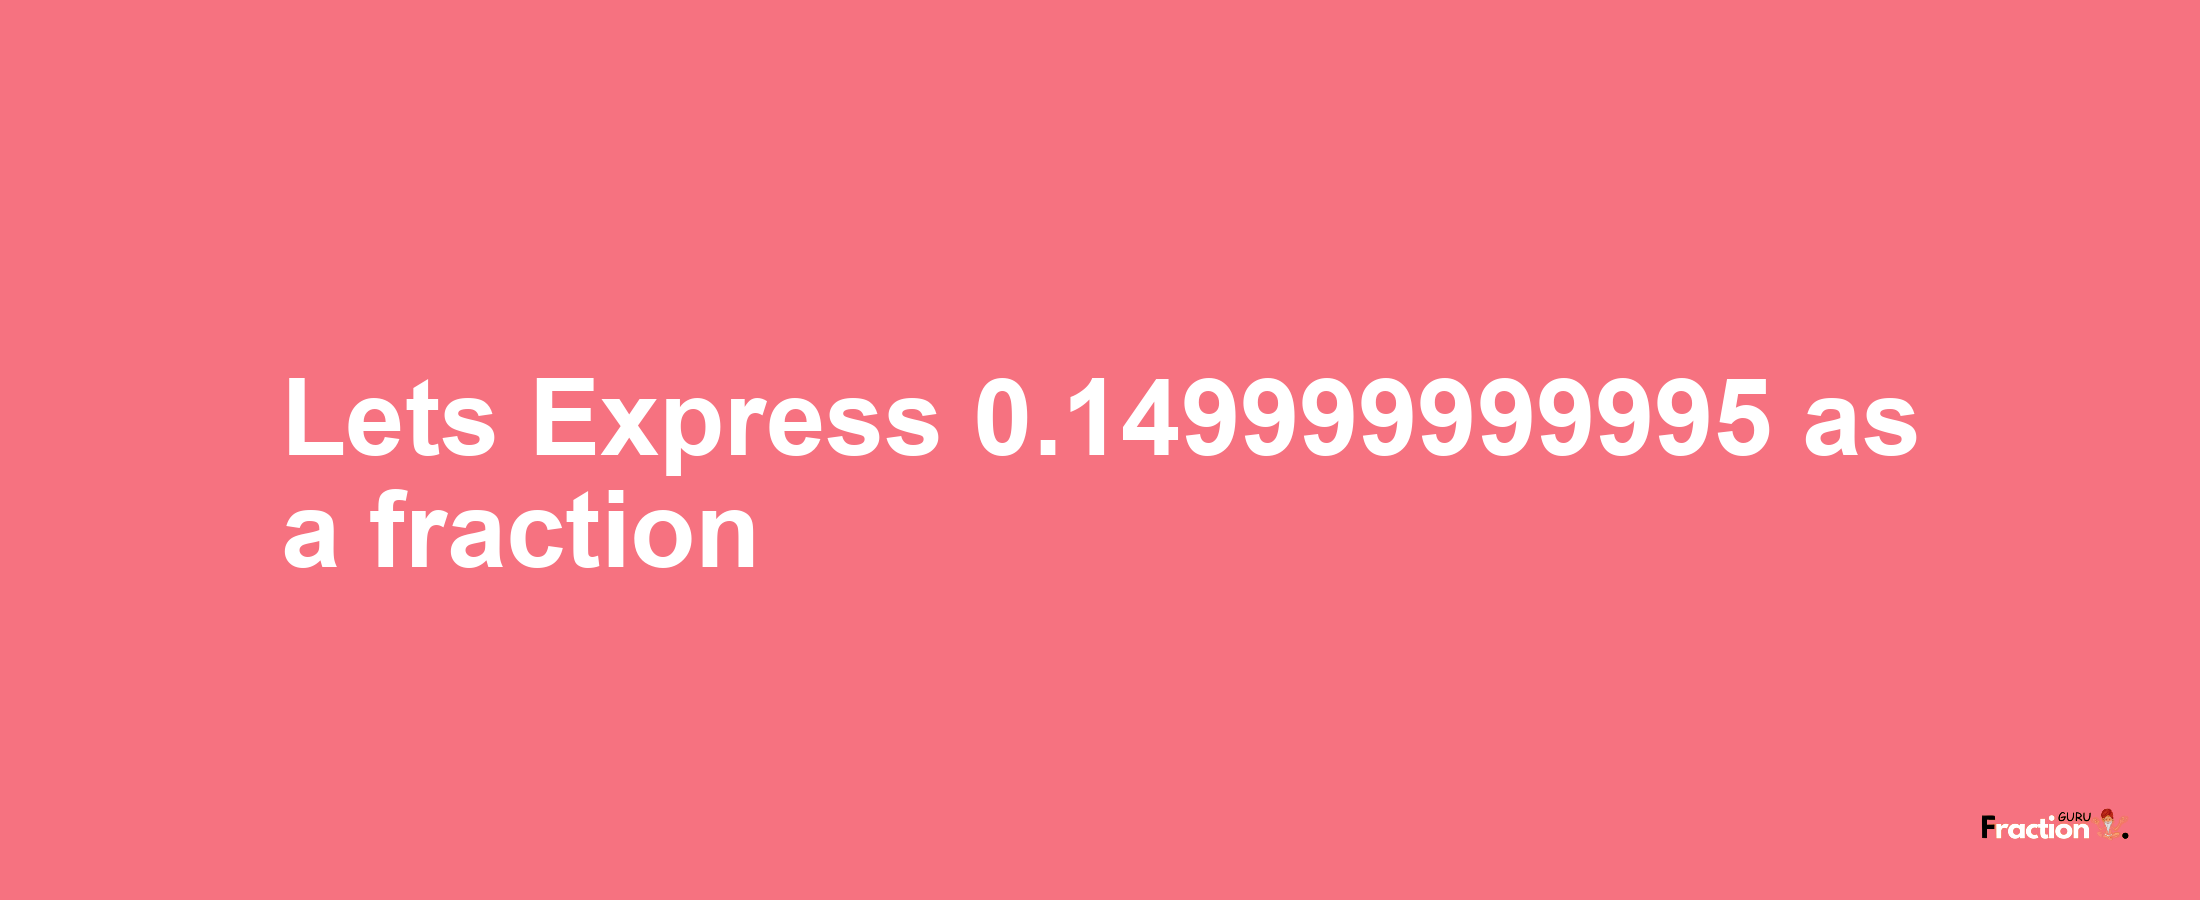 Lets Express 0.149999999995 as afraction